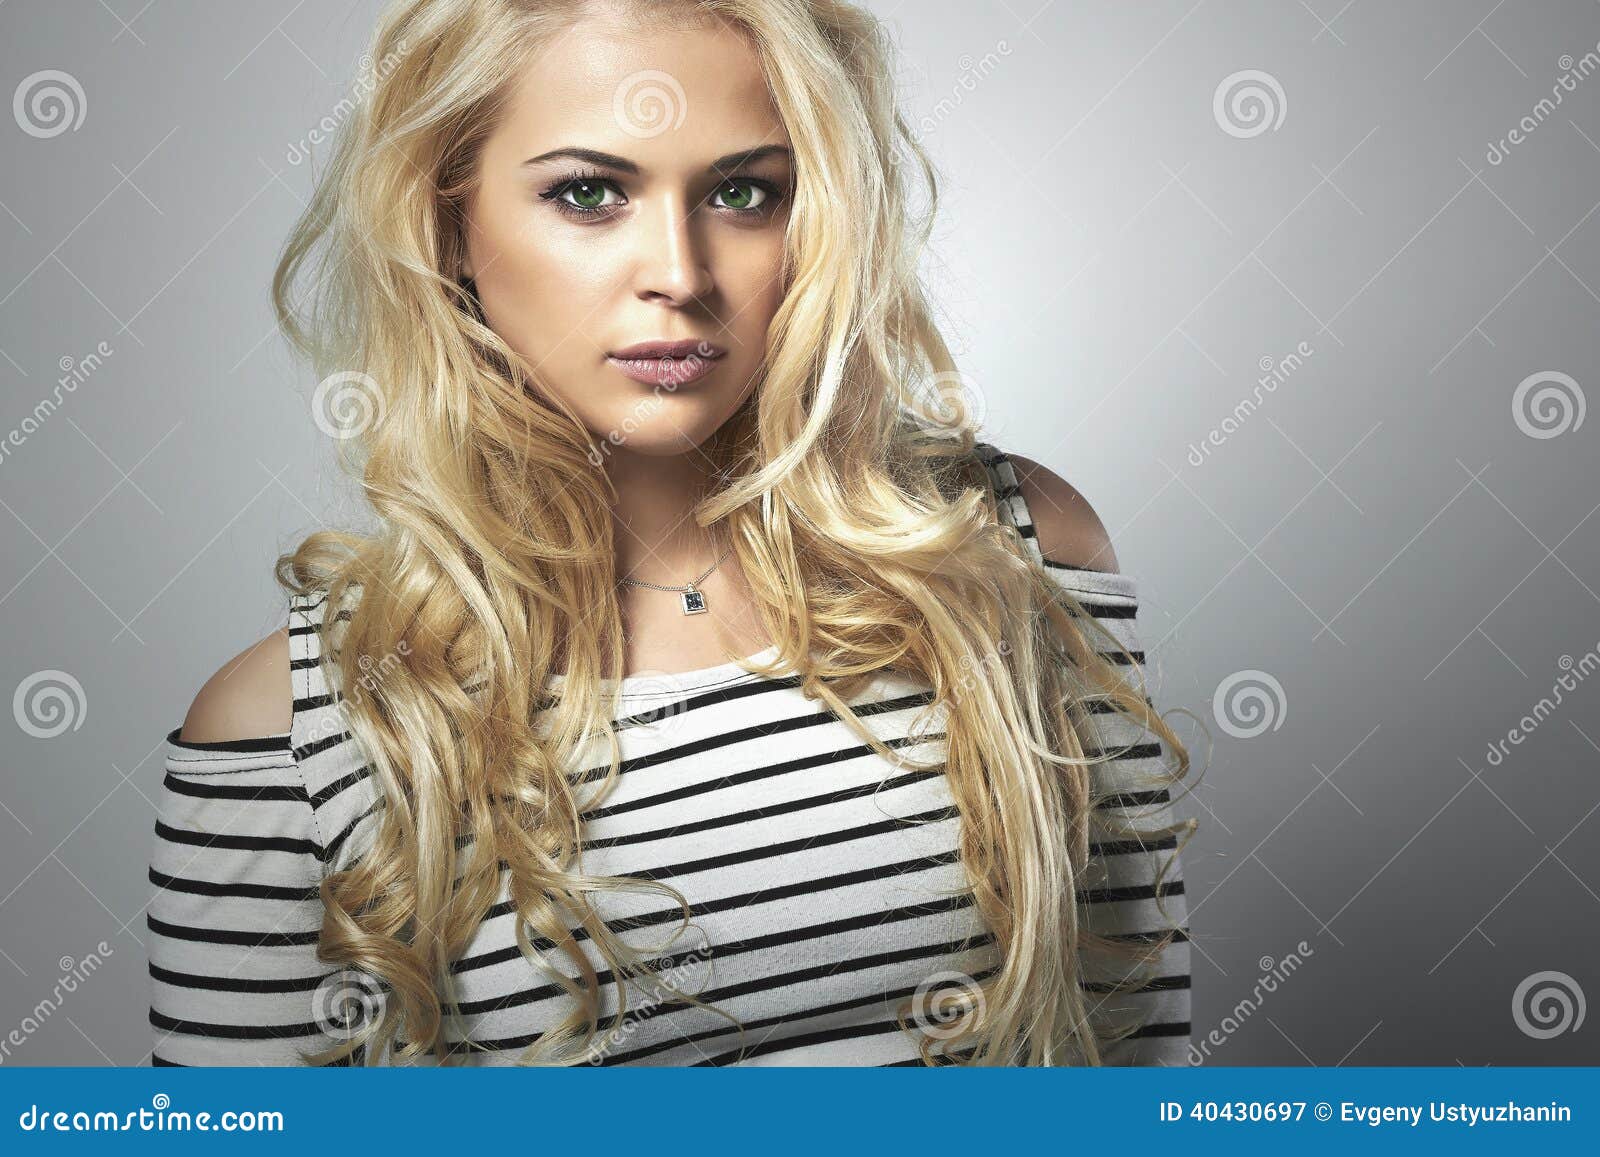 Beautiful Blond Woman in Dress. Curly Hair Stock Image - Image of dress ...